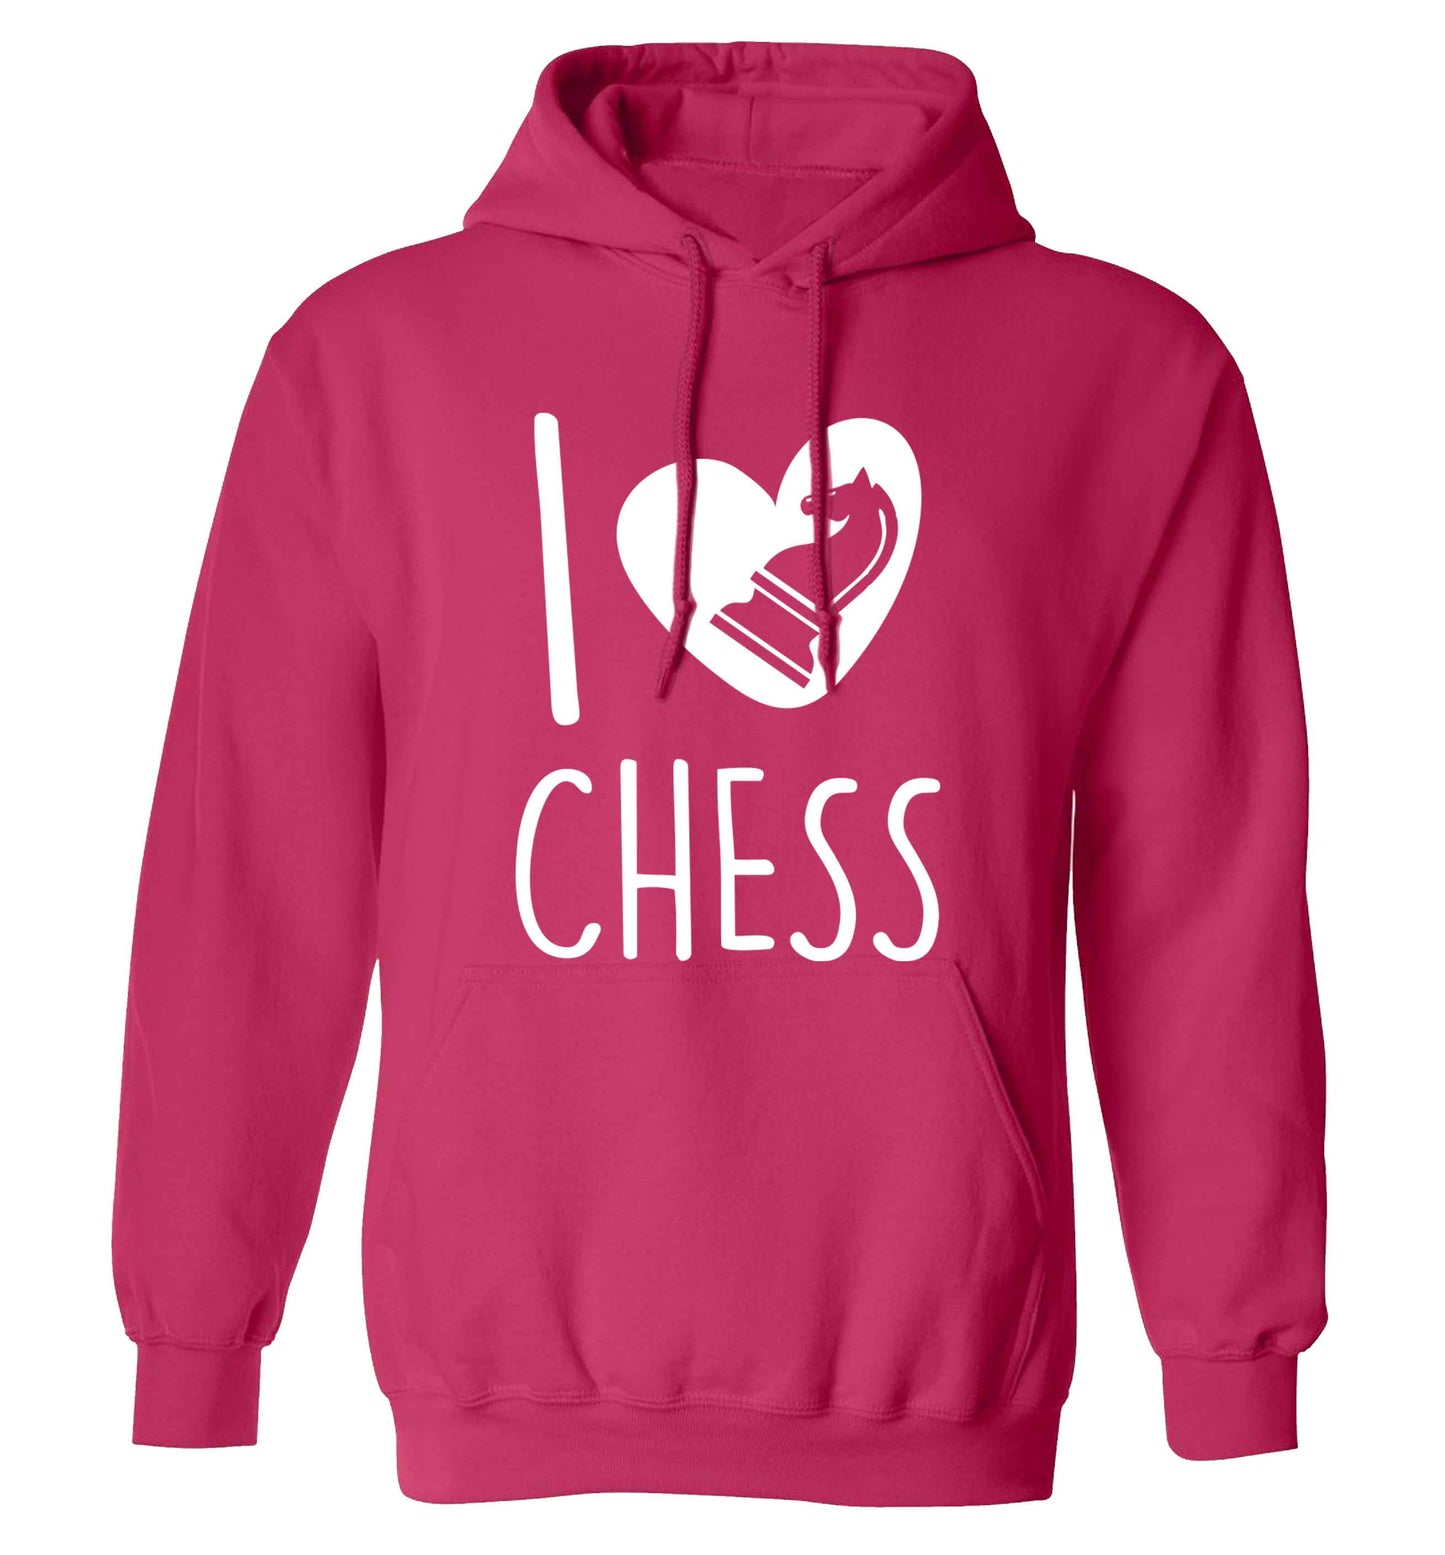 I love chess adults unisex pink hoodie 2XL